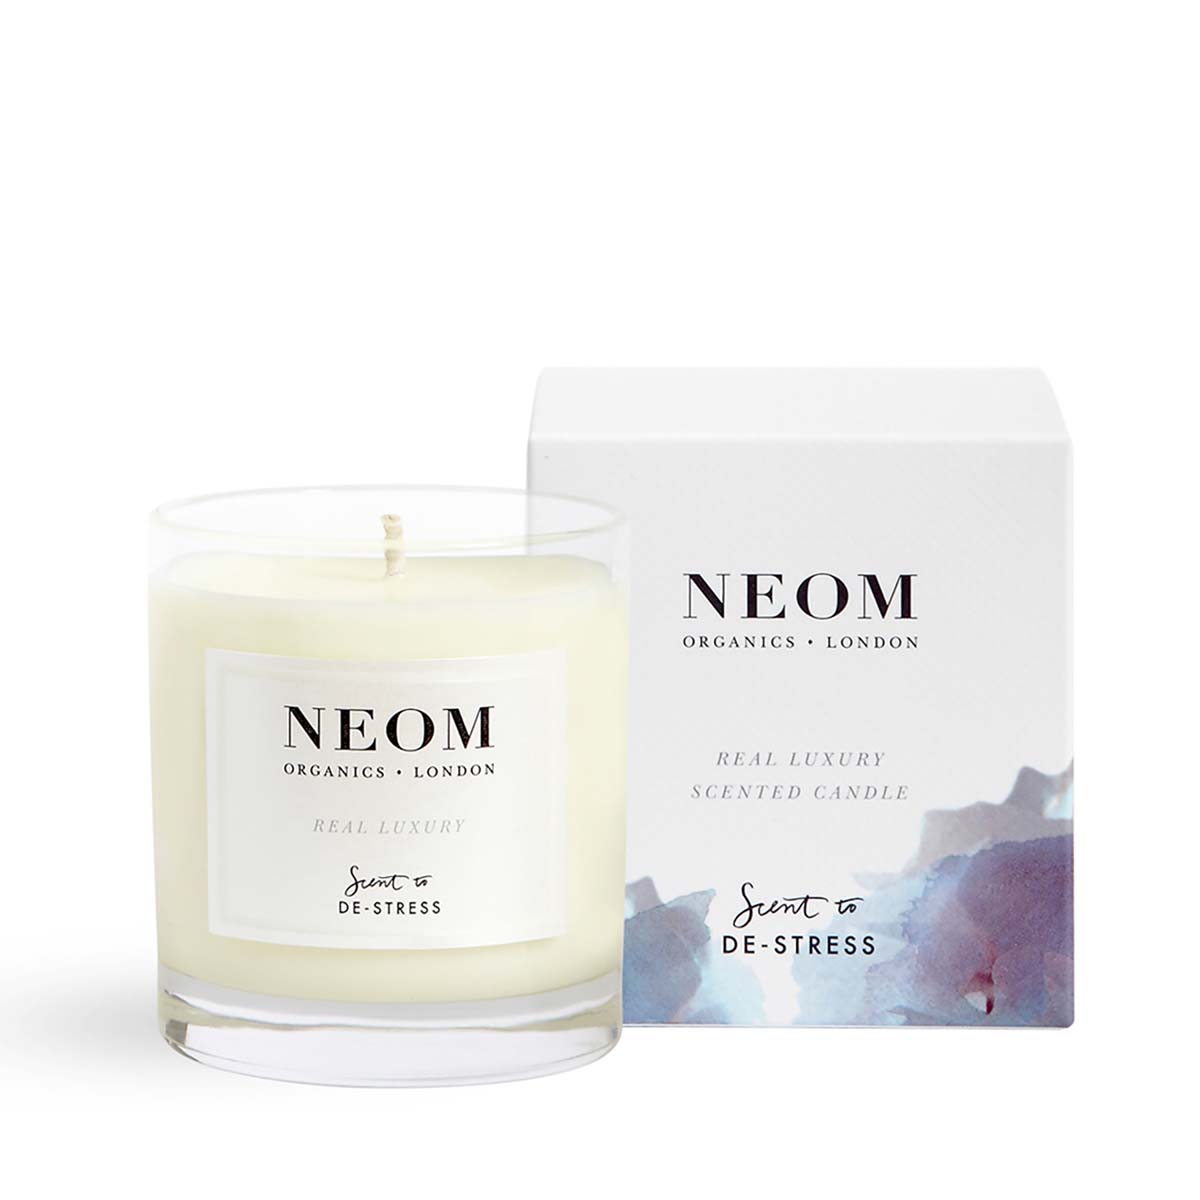 Neom Real Luxury Scented Candle (1 Wick) 185G